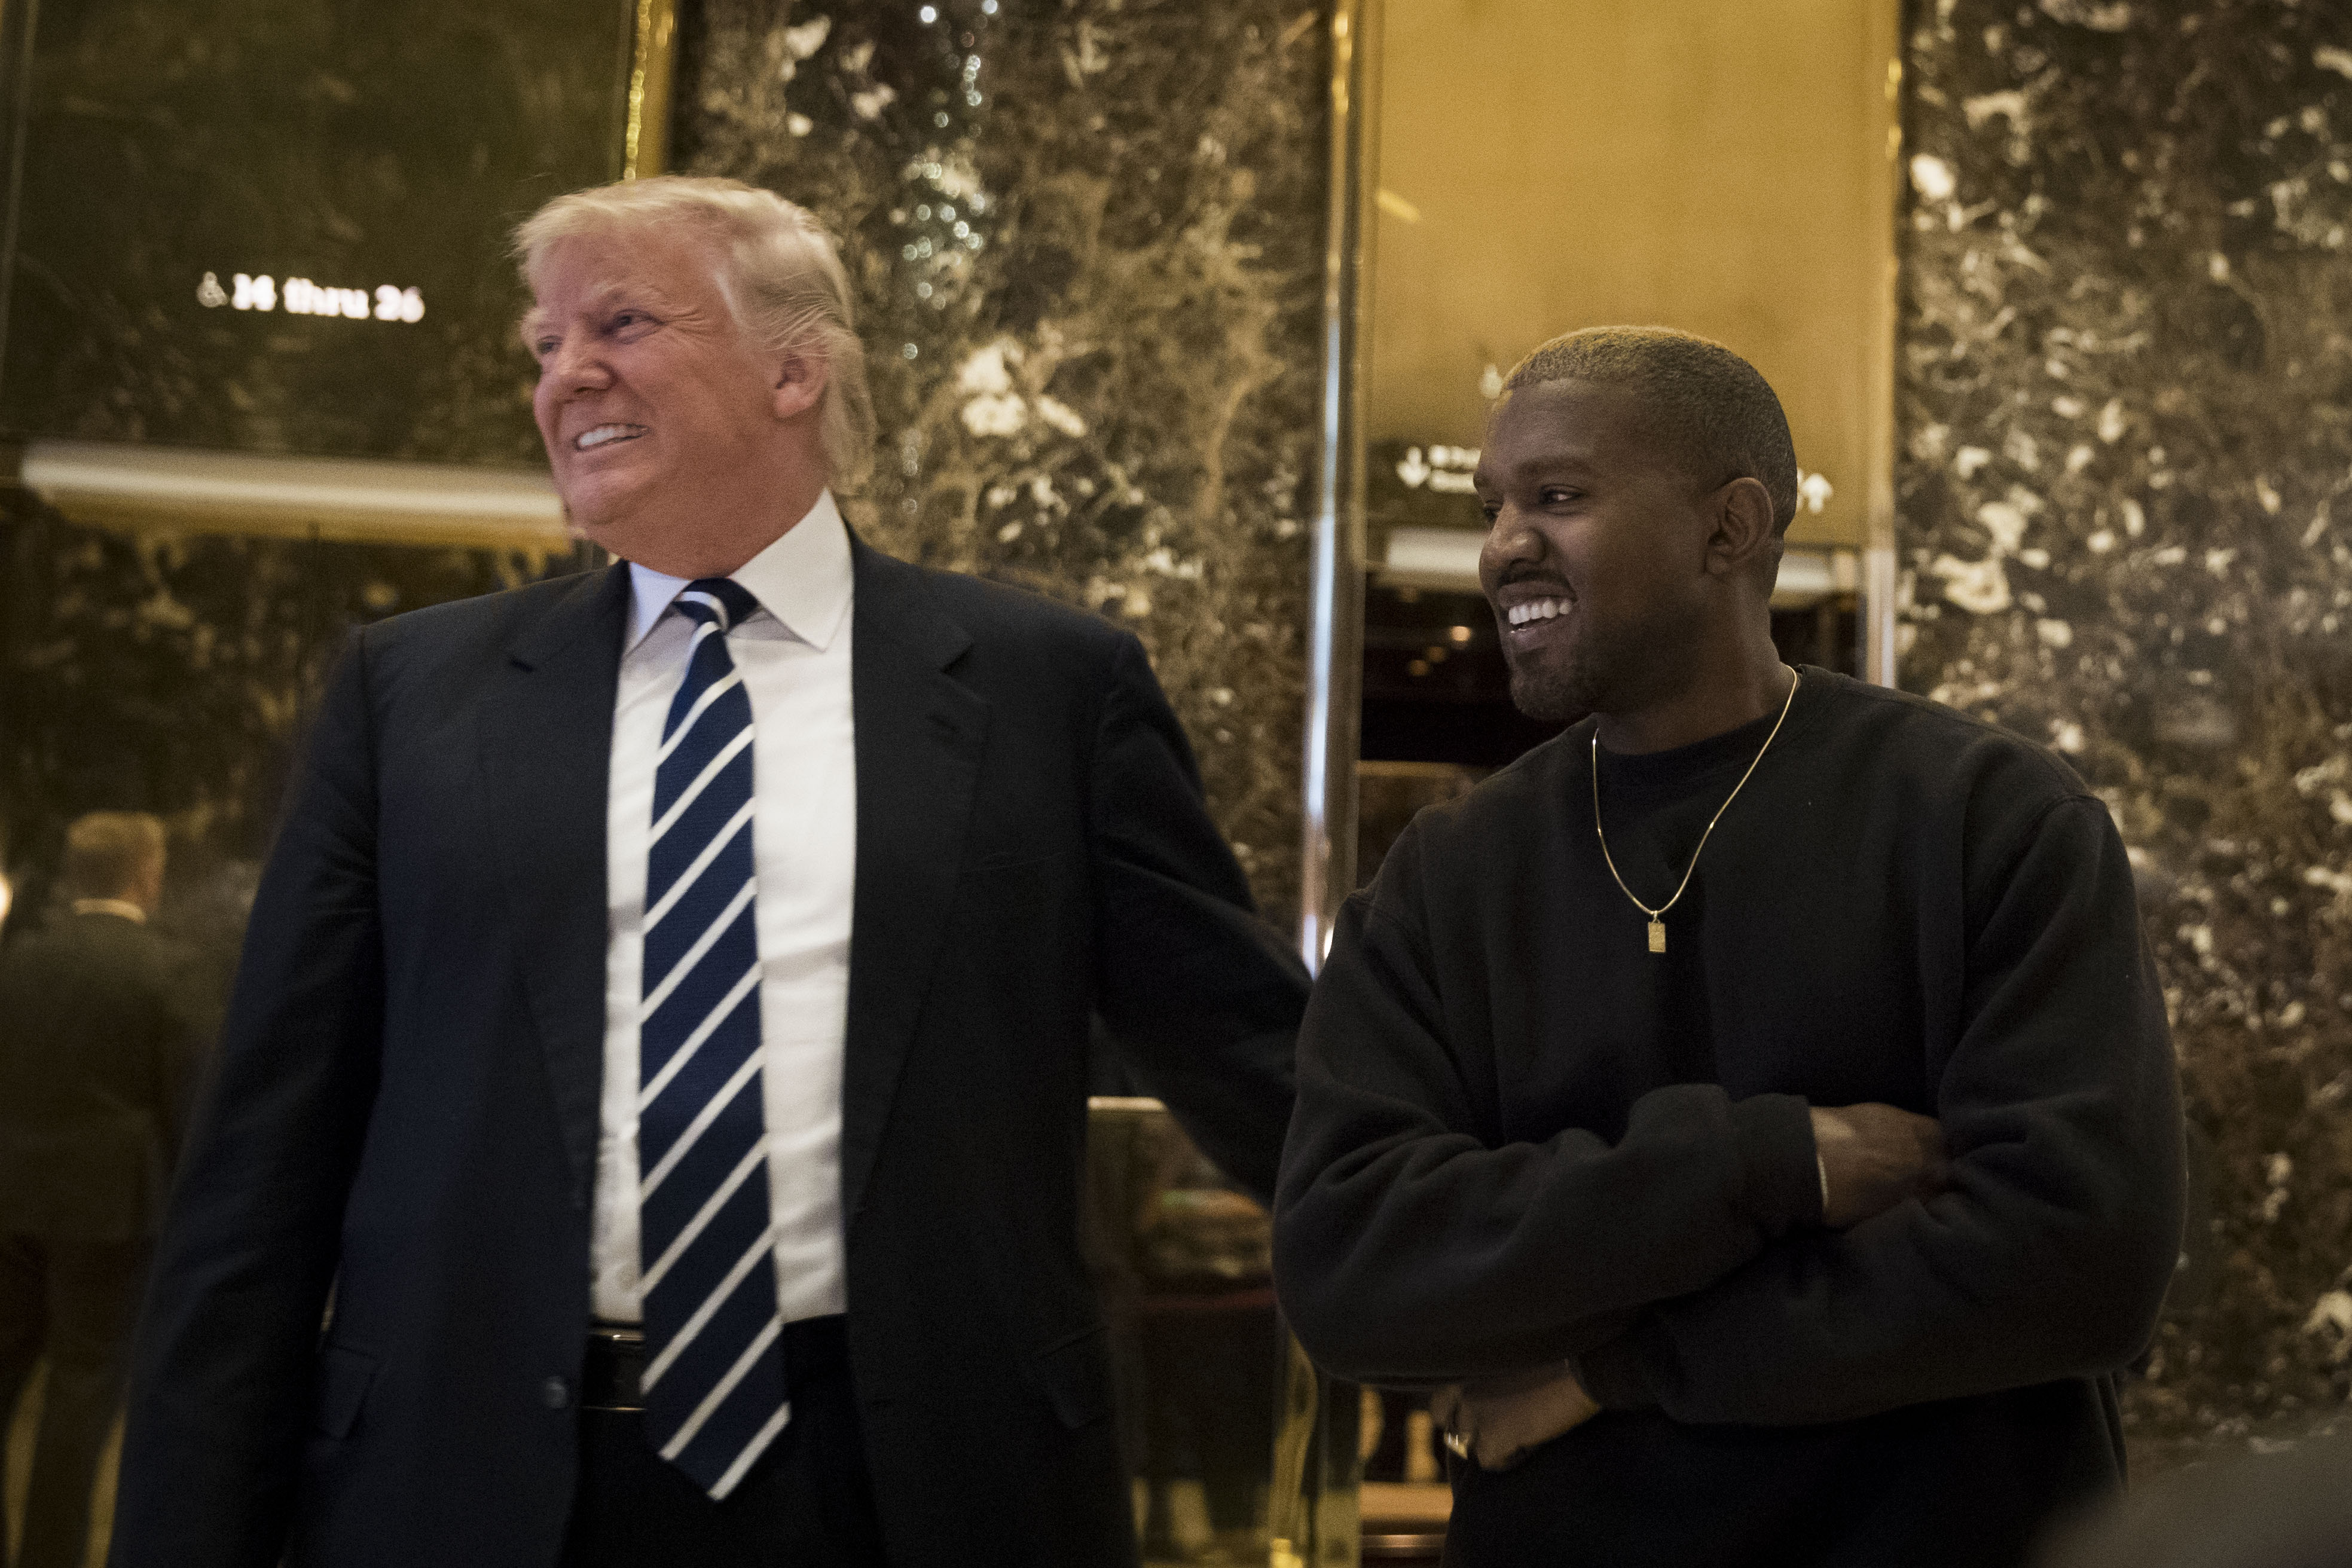 President-elect Donald Trump and Kanye West stand together in the lobby at Trump Tower (Drew Angerer/Getty Images)